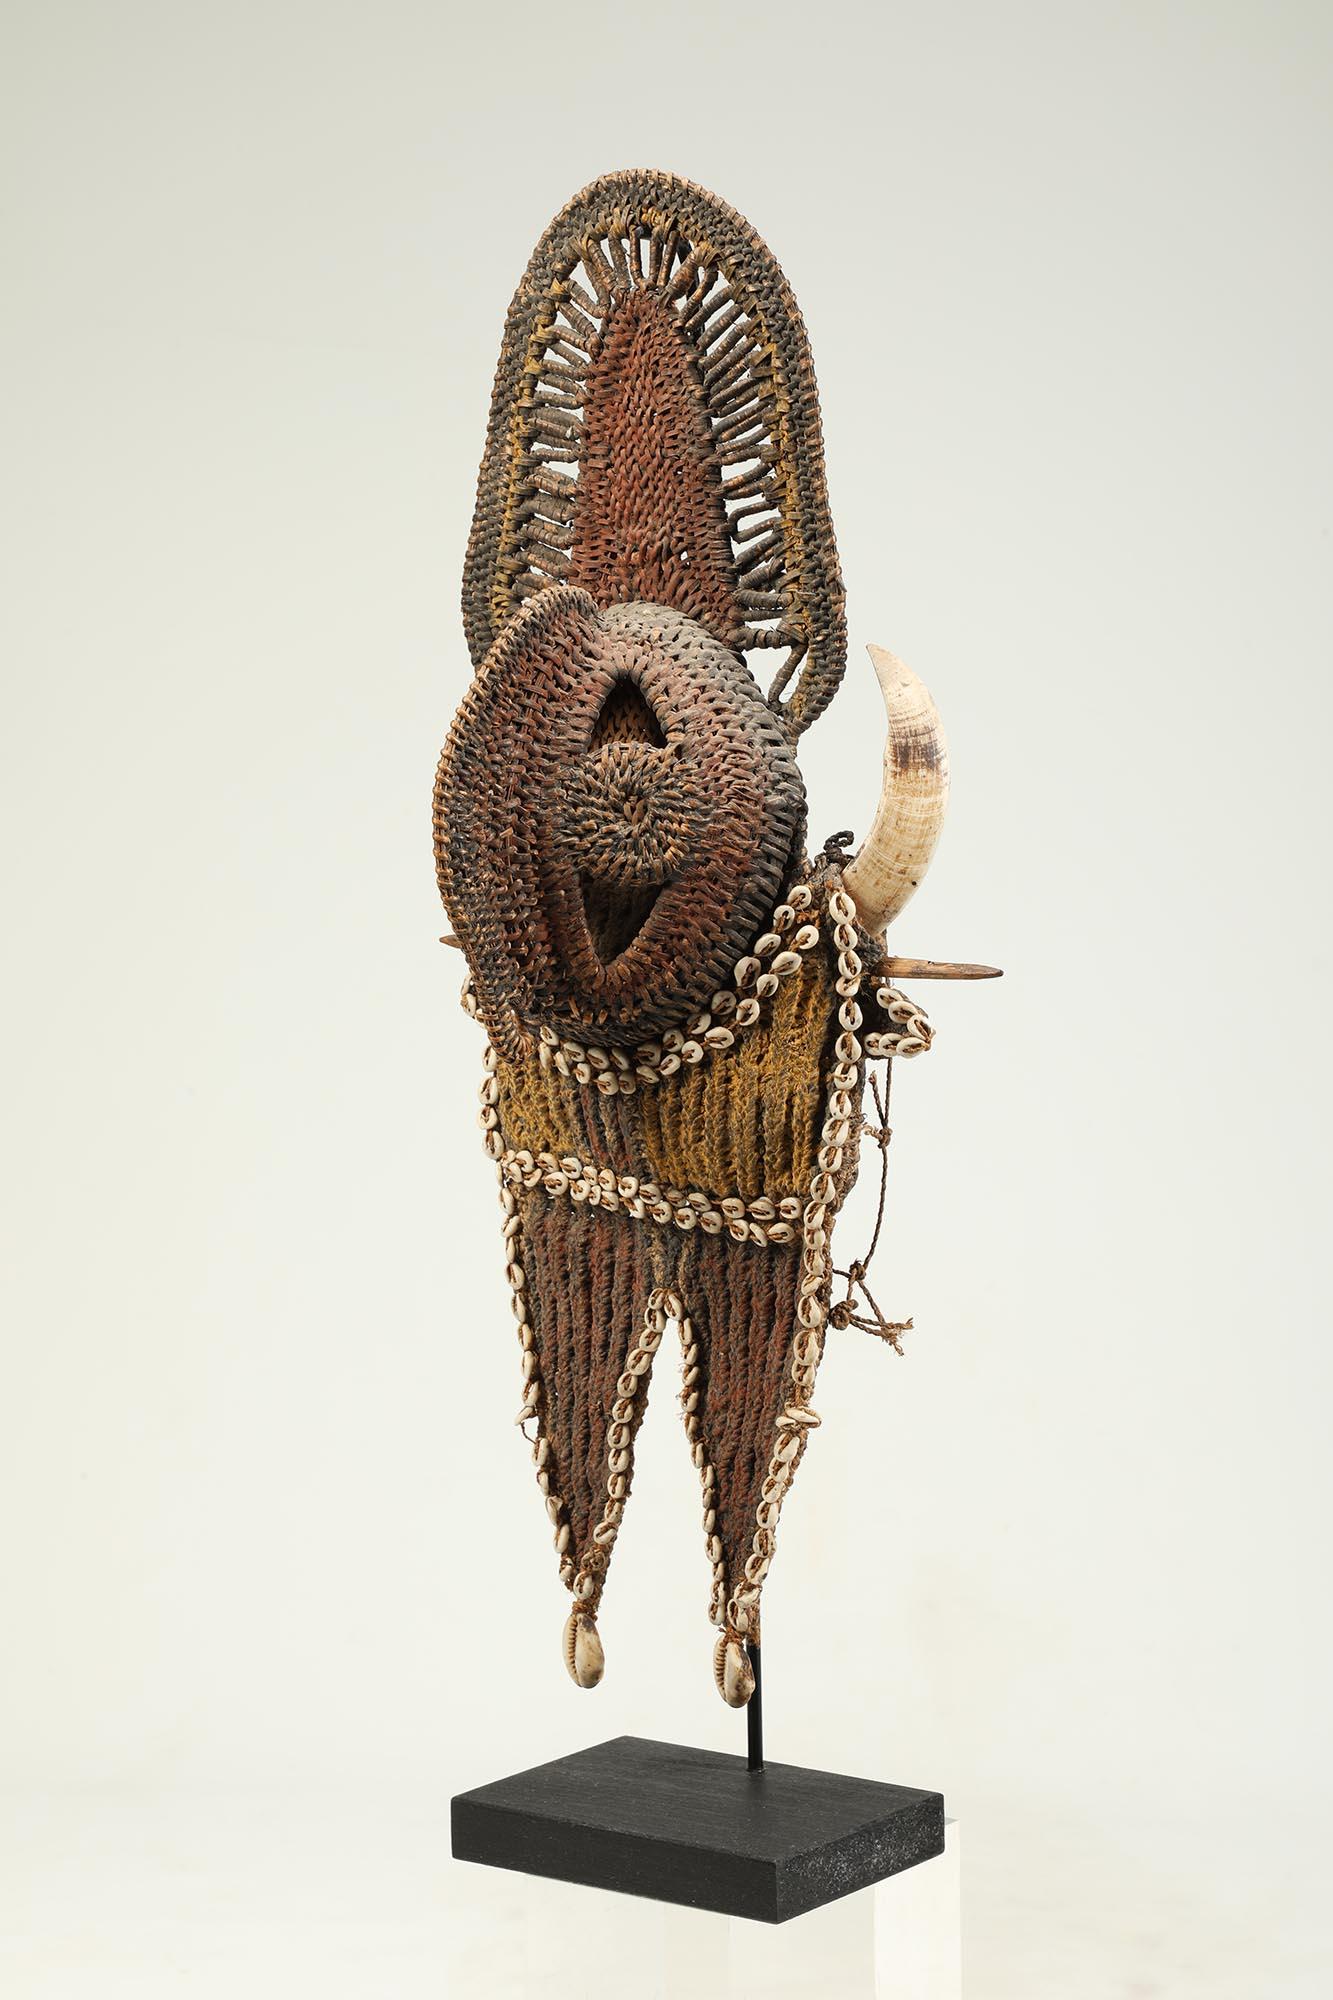 Hand-Crafted Woven Basketry Figural Pectoral Chest Ornament Figure Papua New Guinea tusks